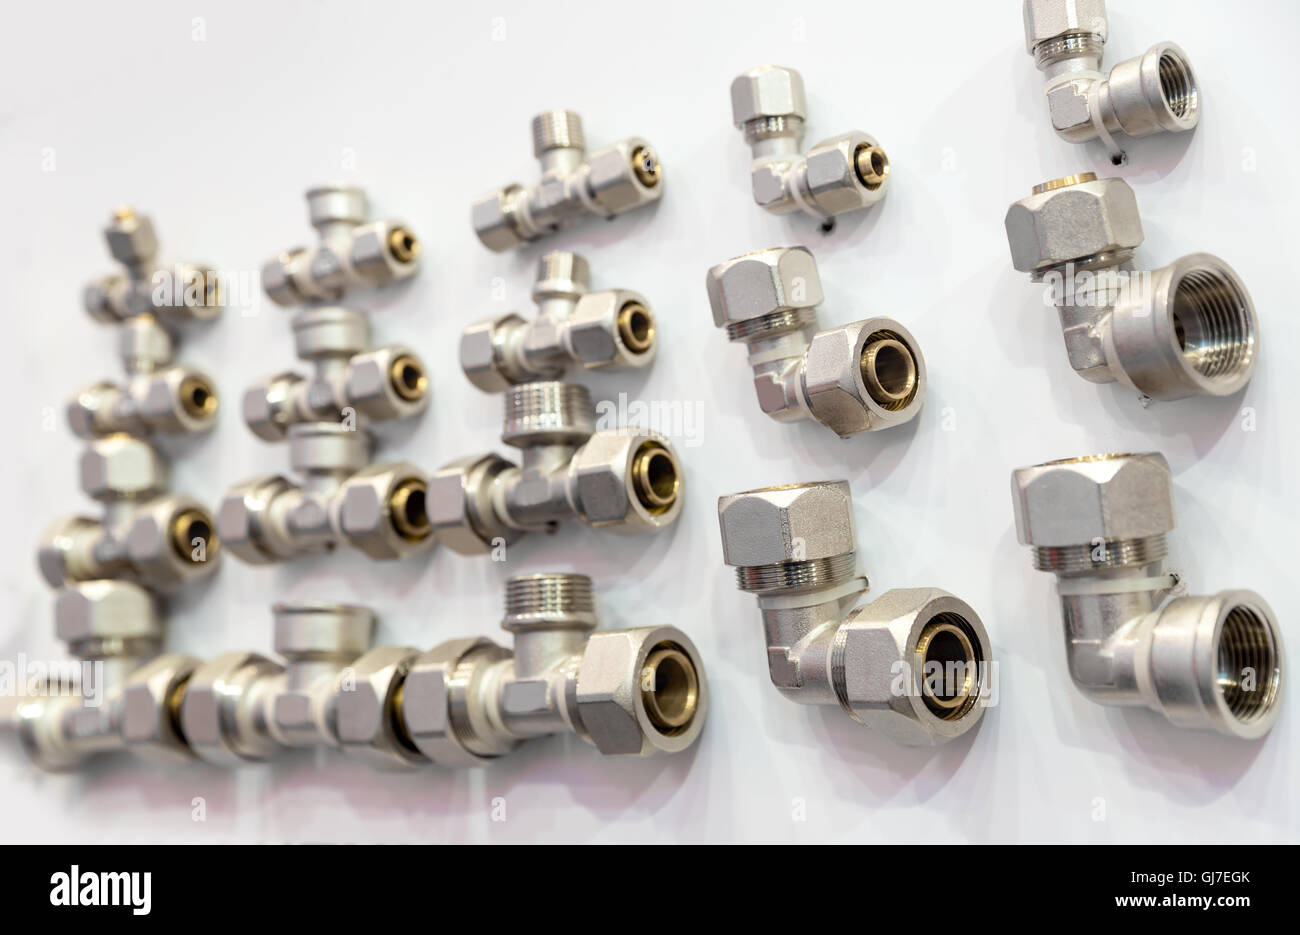 Set of pipe fittings and fixturing components Stock Photo